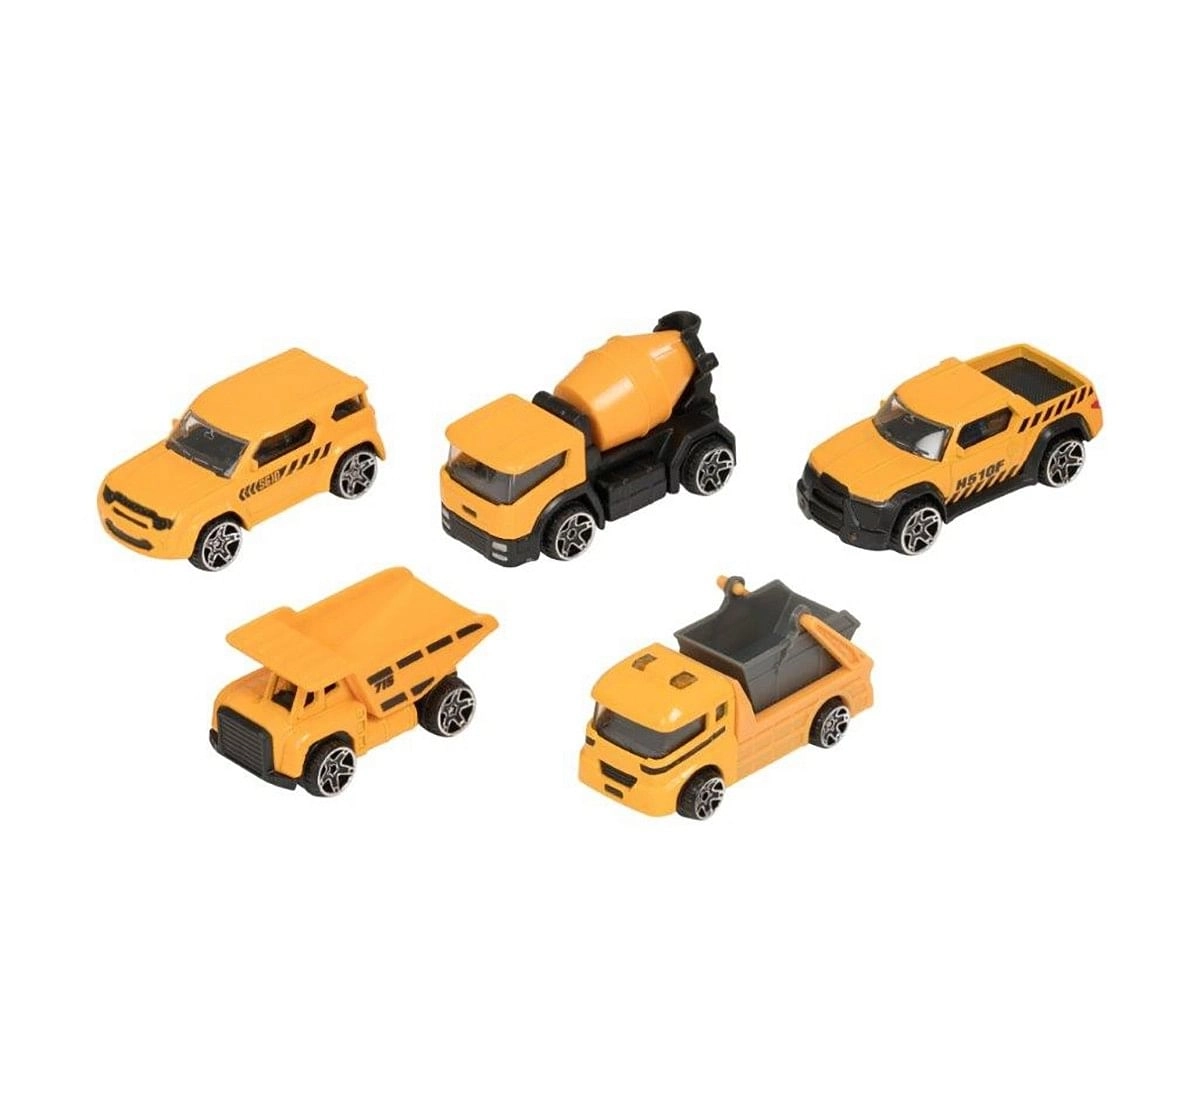 Ralleyz 3" Die Cast Car 5 Pack Assorted Vehicles Vehicles for Kids age 3Y+ 